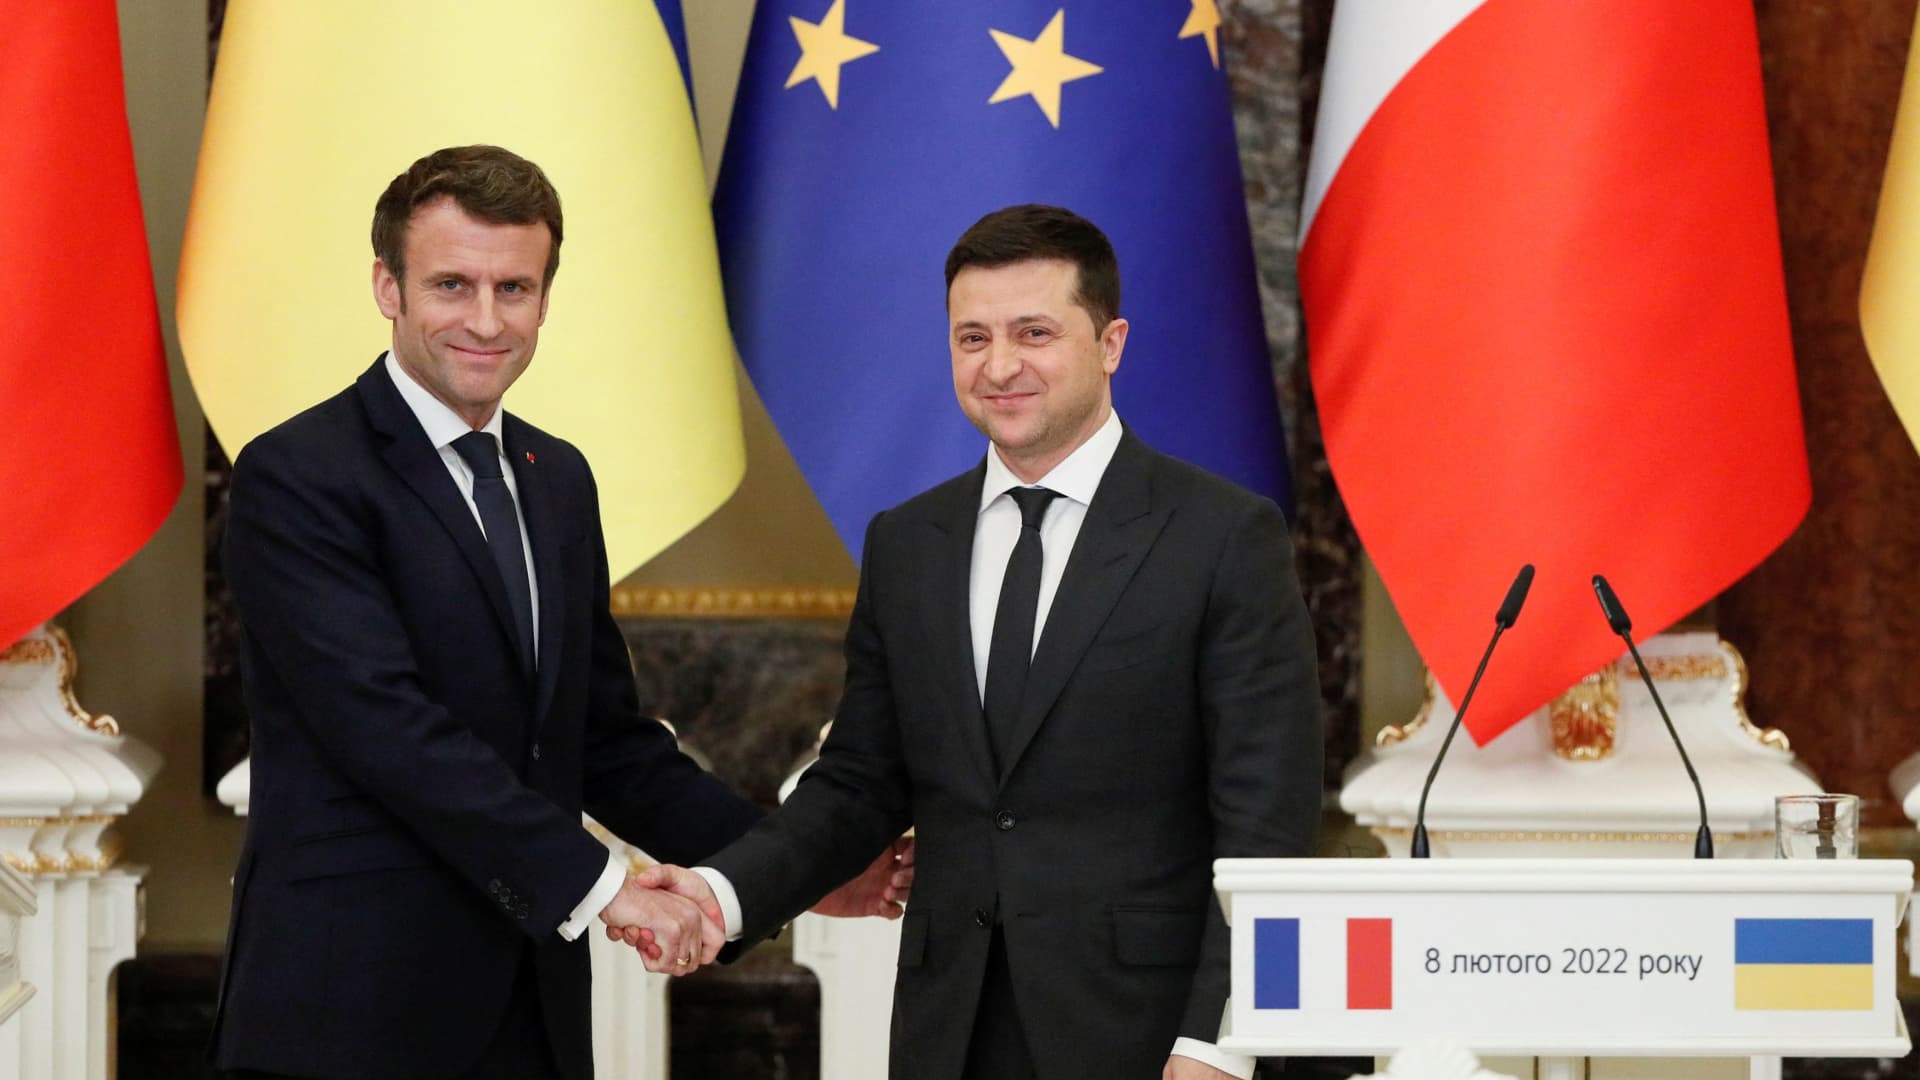 Ukrainian President Volodymyr Zelenskyy shakes hands with French President Emmanuel Macron during a news briefing following their talks in Kyiv, Ukraine on February 8, 2022.